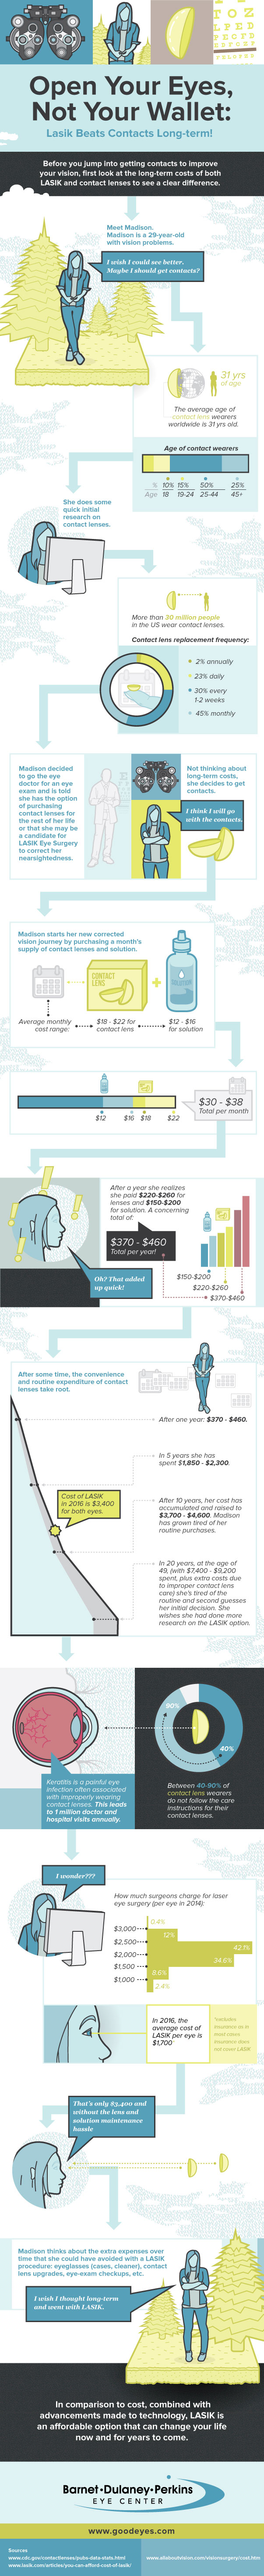 Open-Your-Eyes-Not-Your-Wallet-LASIK-Beats-Contacts-Long-term-infographic-plaza